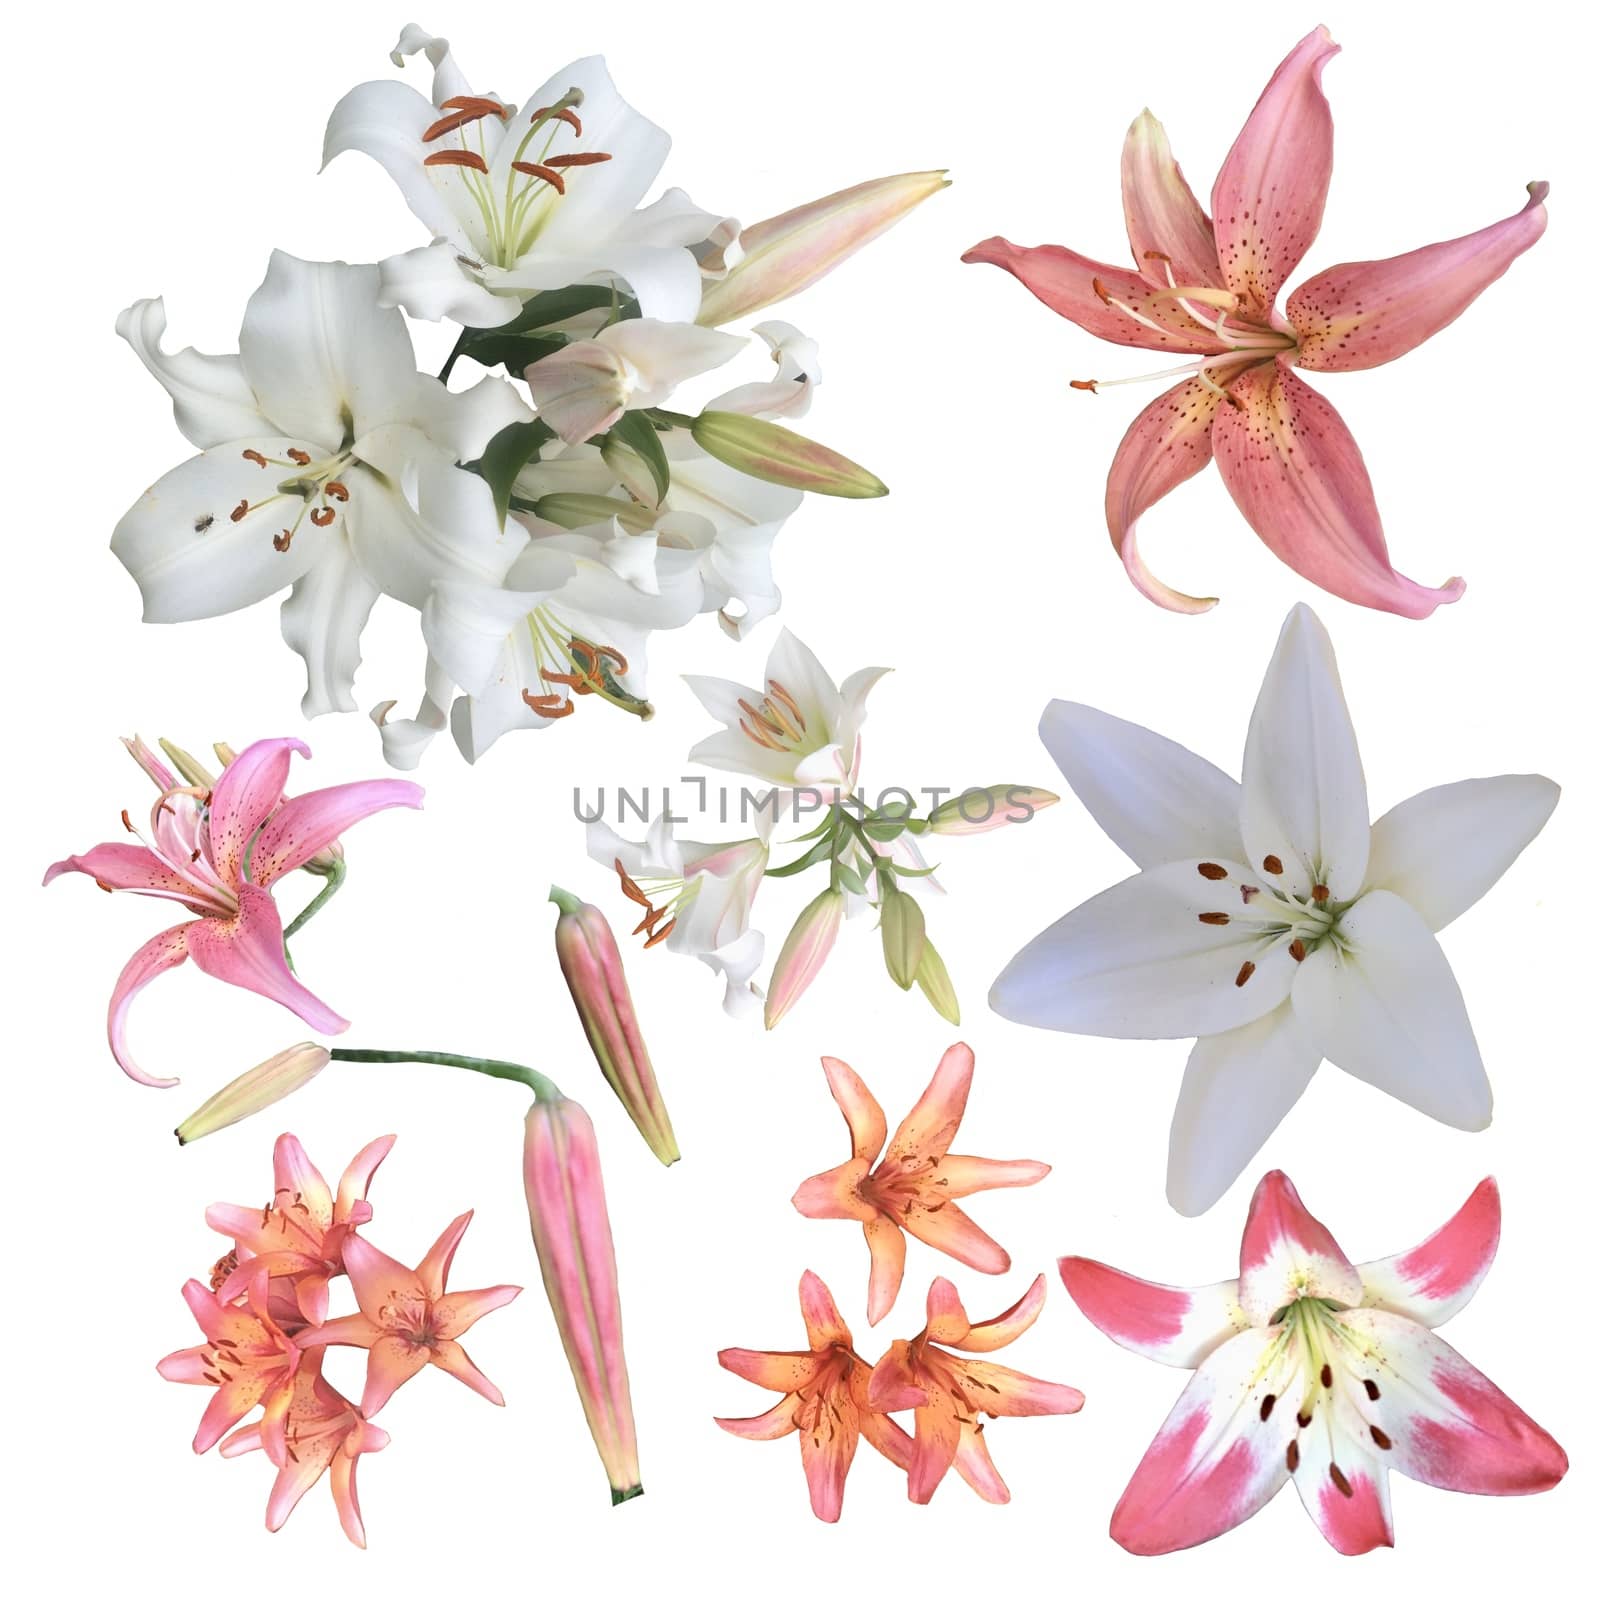 Set of fresh lileis flowers isolated on white background. Collection of white and pink lily decoration element. 